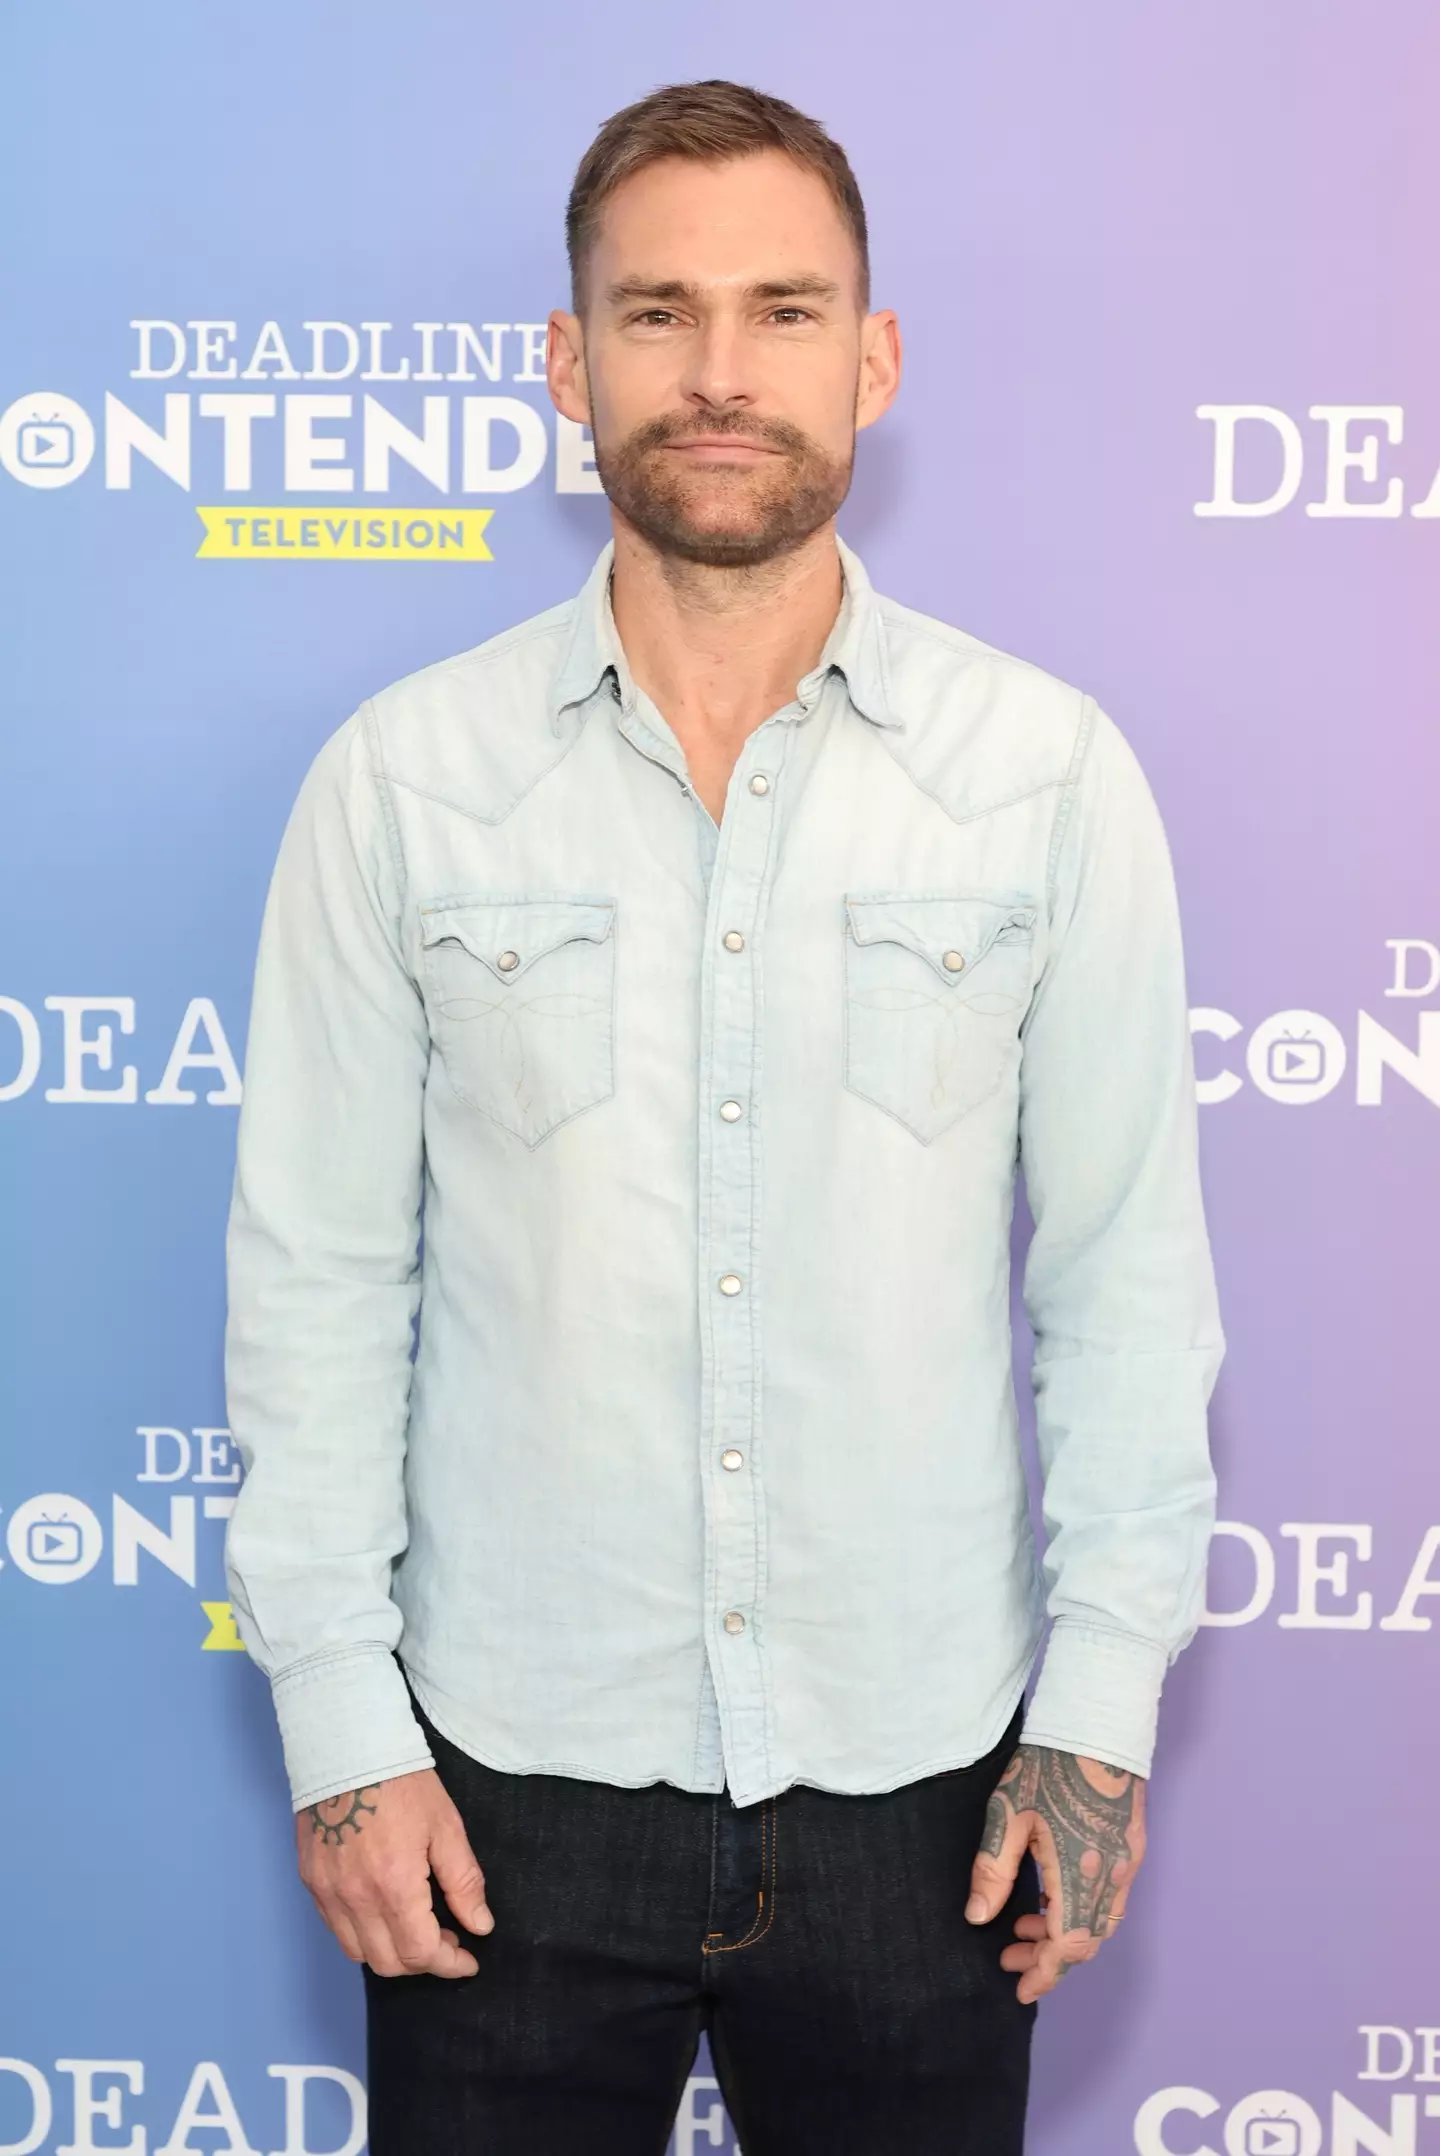 Seann William Scott has not been seen in much since the 90s classic.